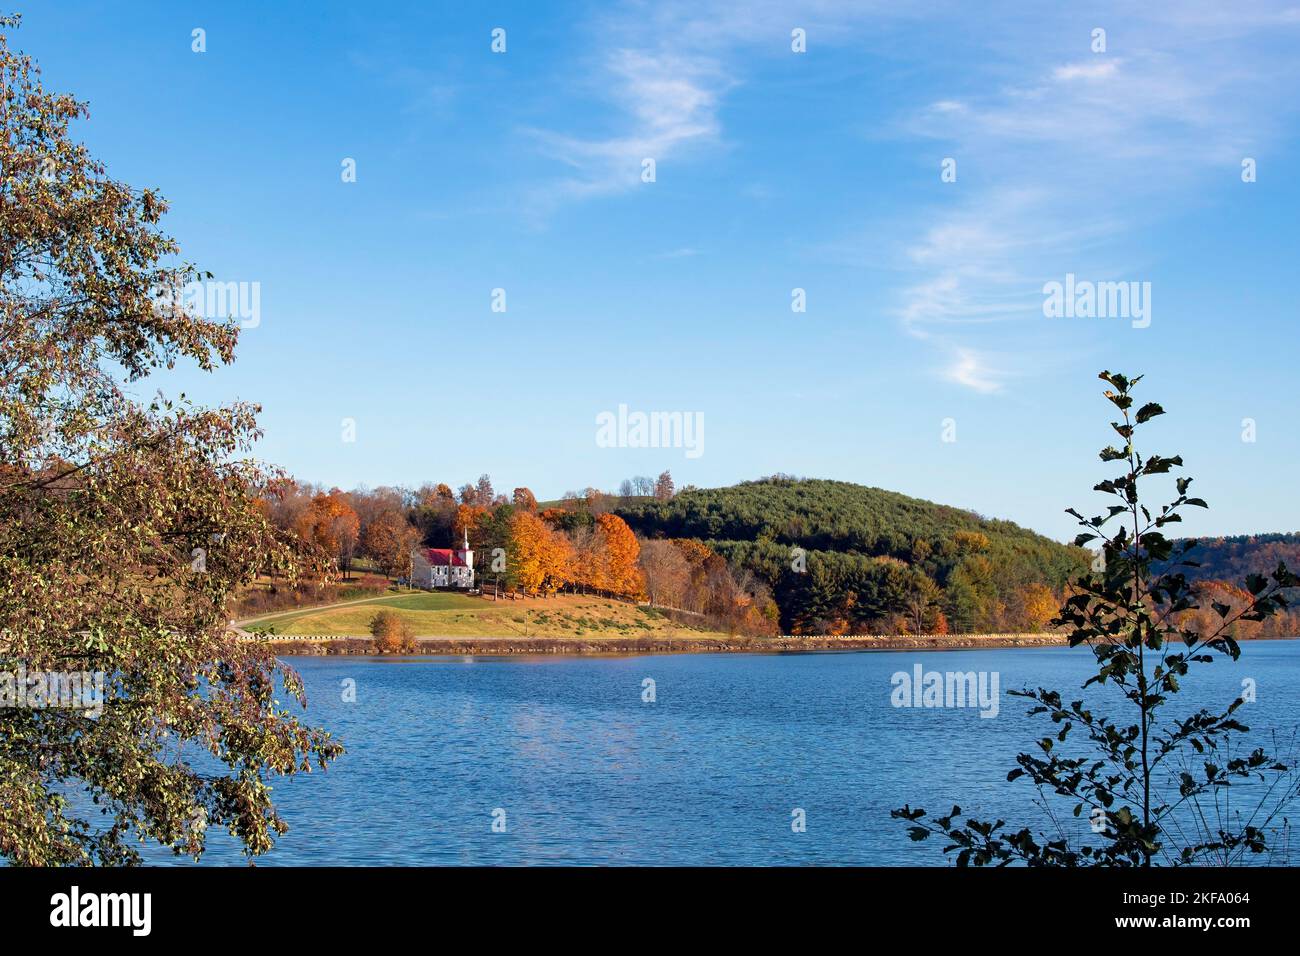 Beautiful old country church on a hillside in Appalachia overlooking a lake with negative space. Stock Photo